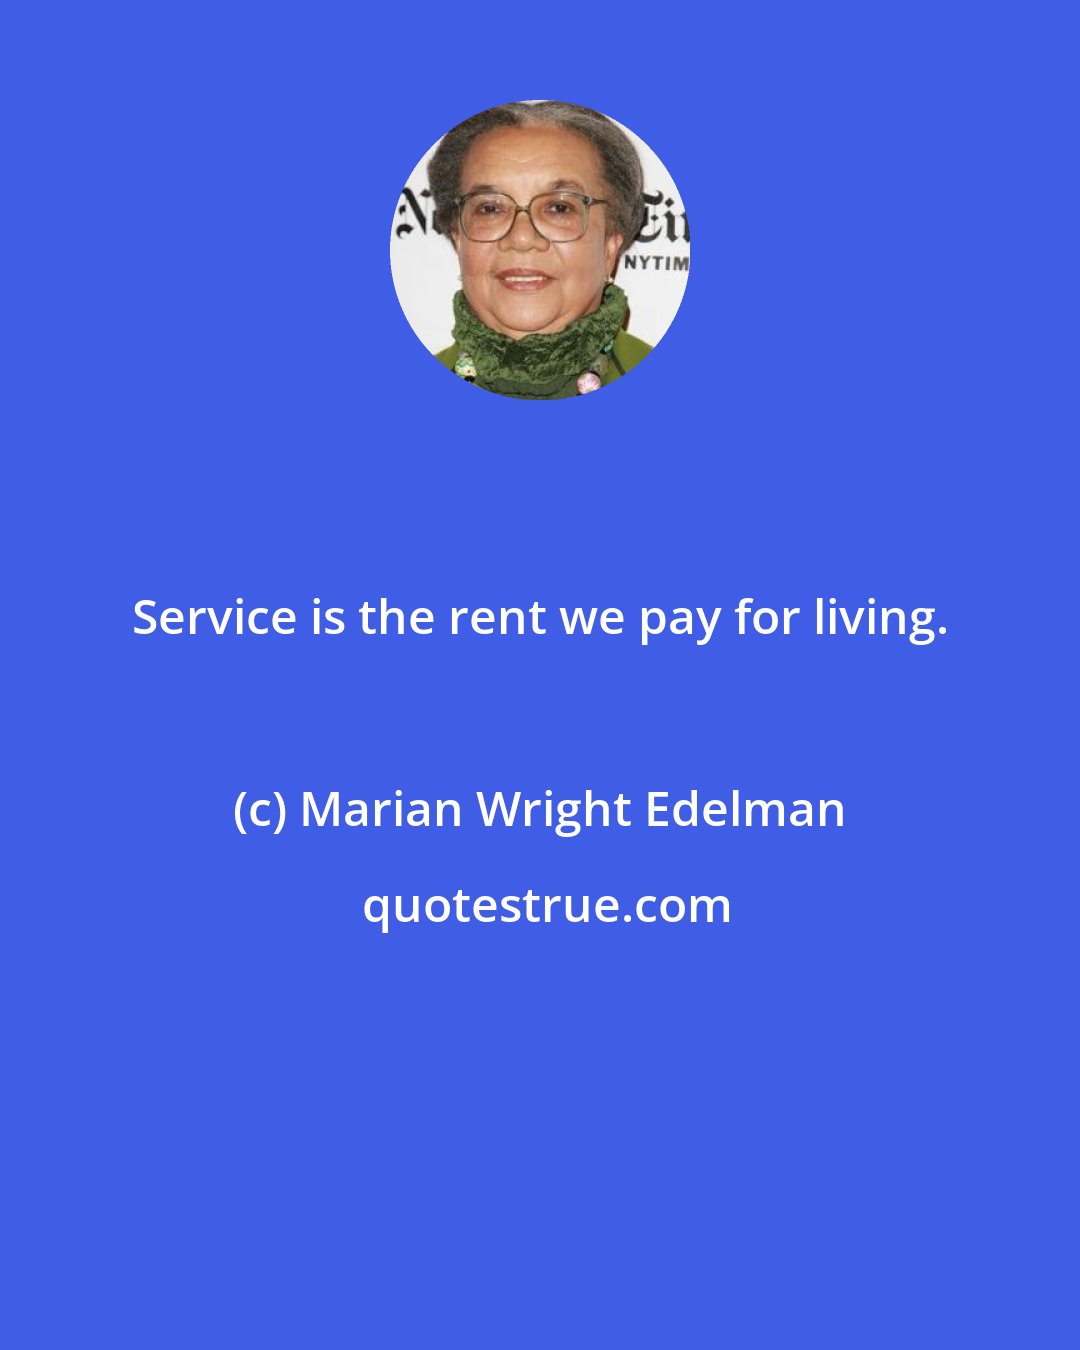 Marian Wright Edelman: Service is the rent we pay for living.